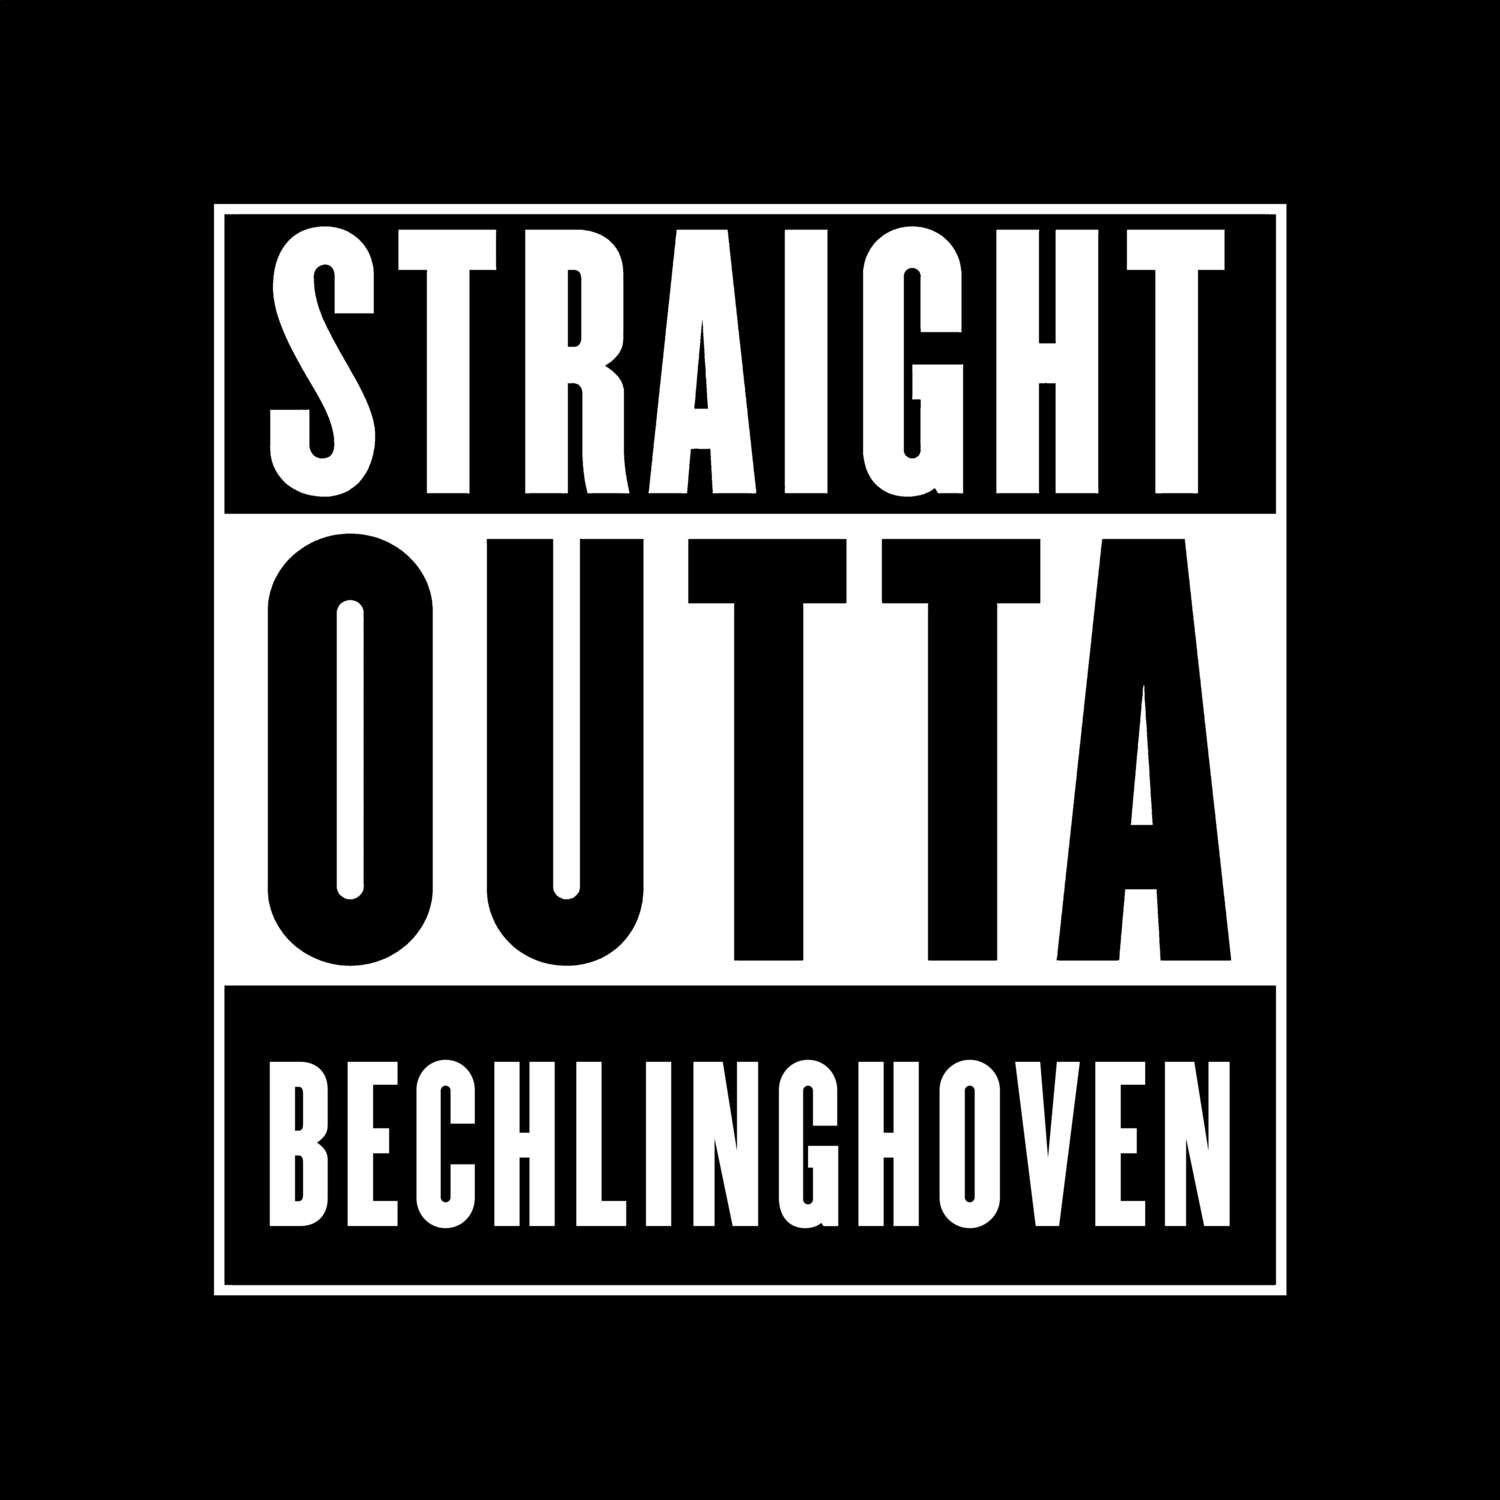 Bechlinghoven T-Shirt »Straight Outta«